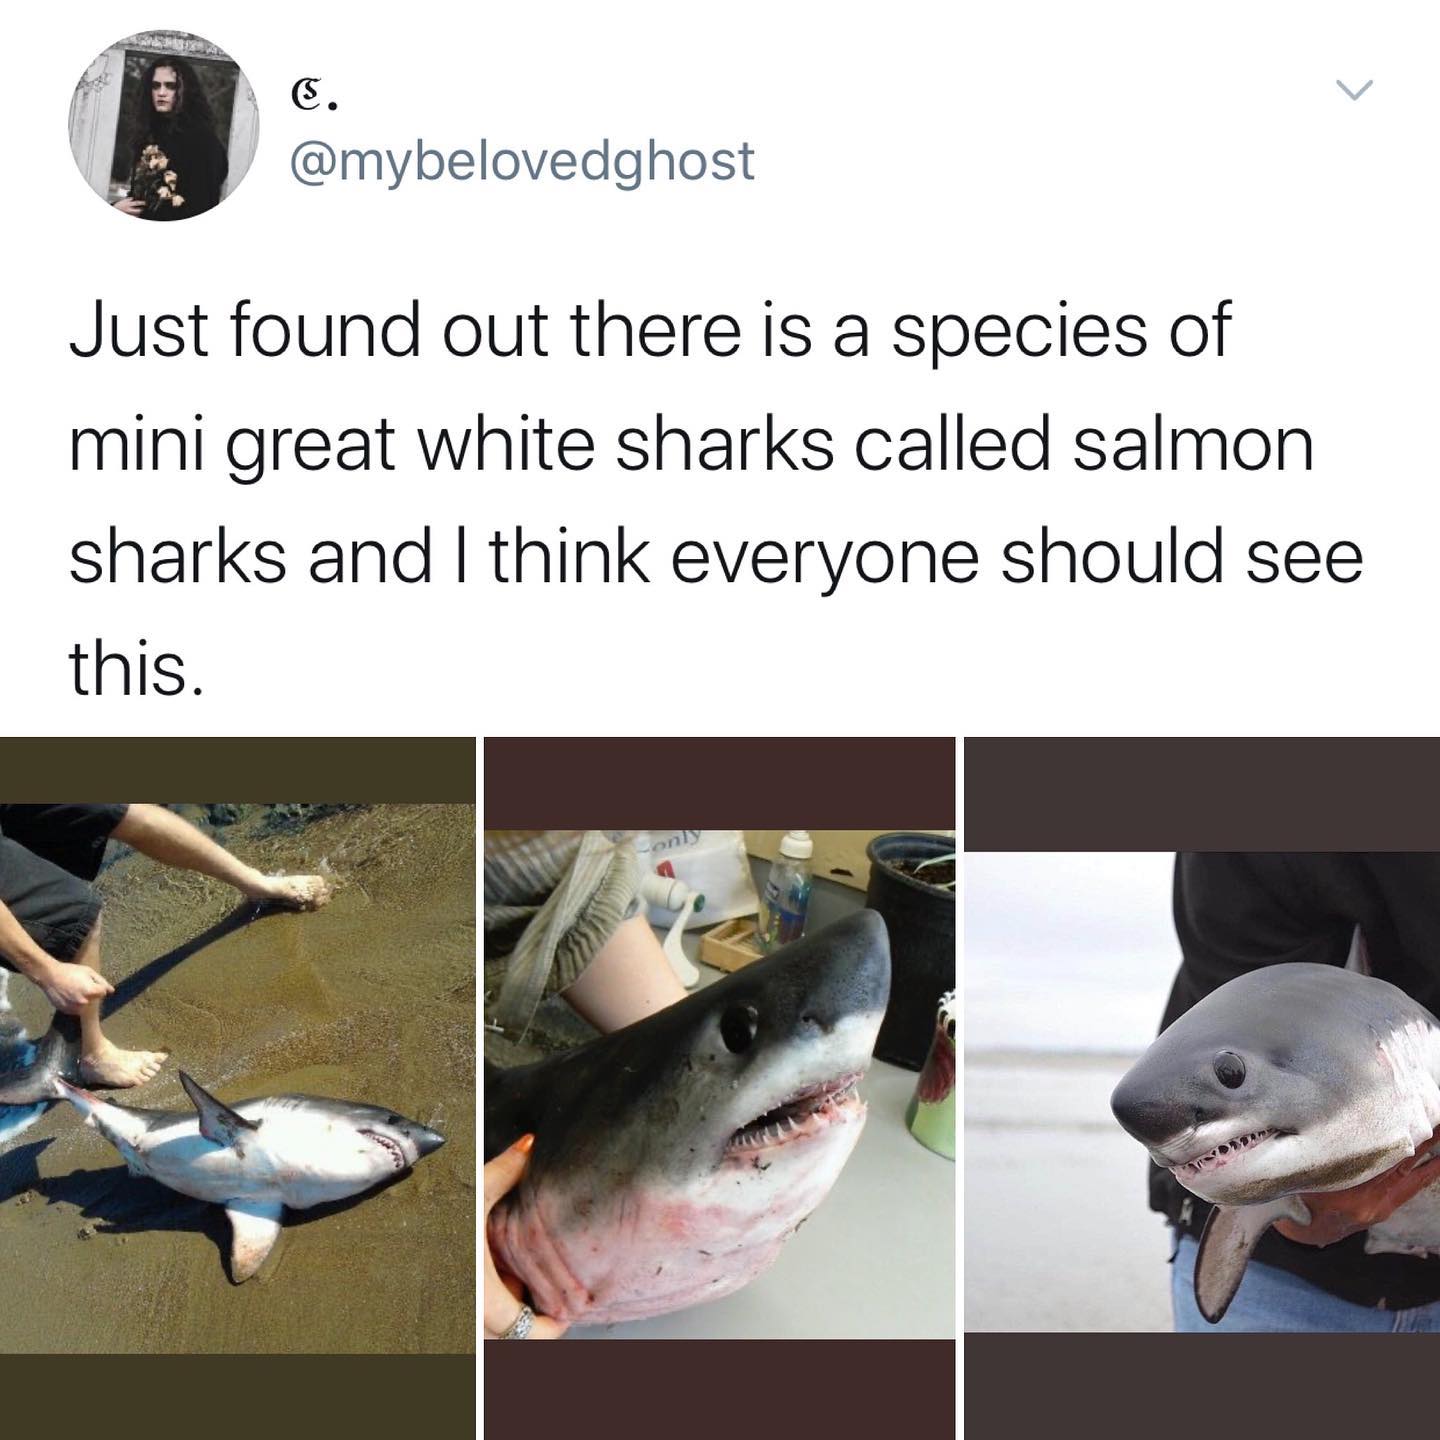 dank memes - twitter - fauna - C. Just found out there is a species of mini great white sharks called salmon sharks and I think everyone should see this.